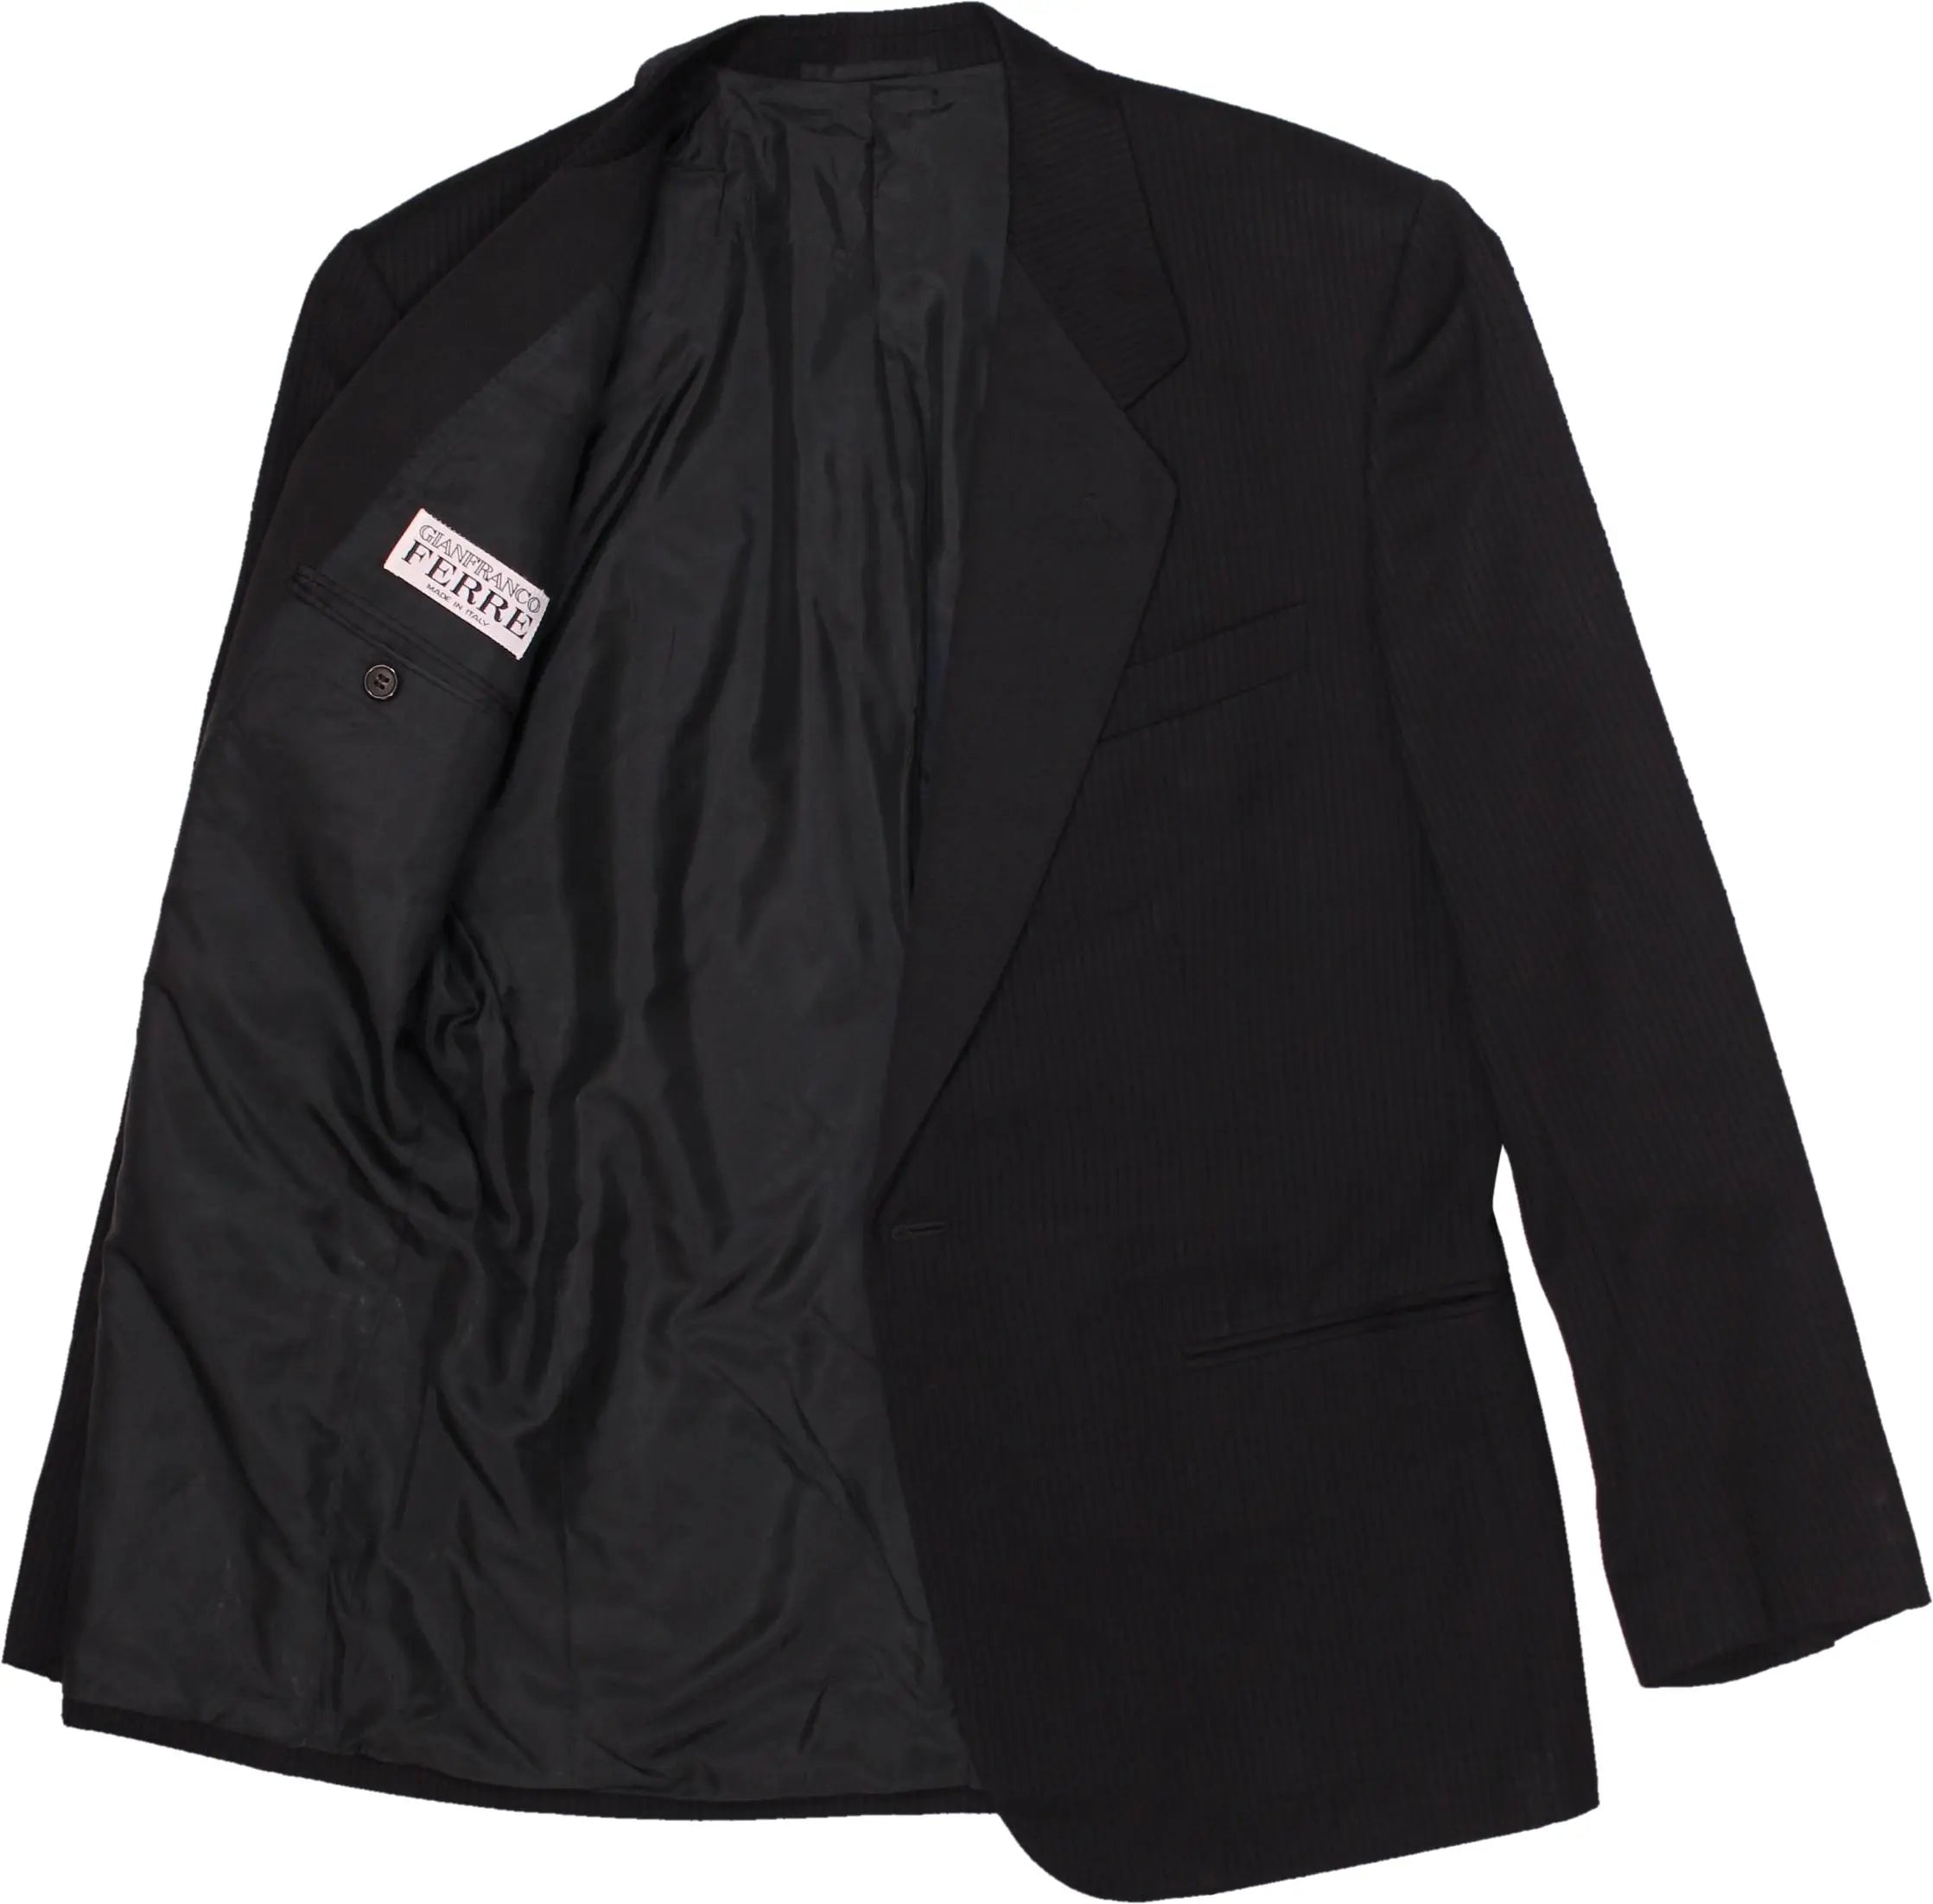 Gianfranco Ferre - Black Blazer by Gianfranco Ferre- ThriftTale.com - Vintage and second handclothing